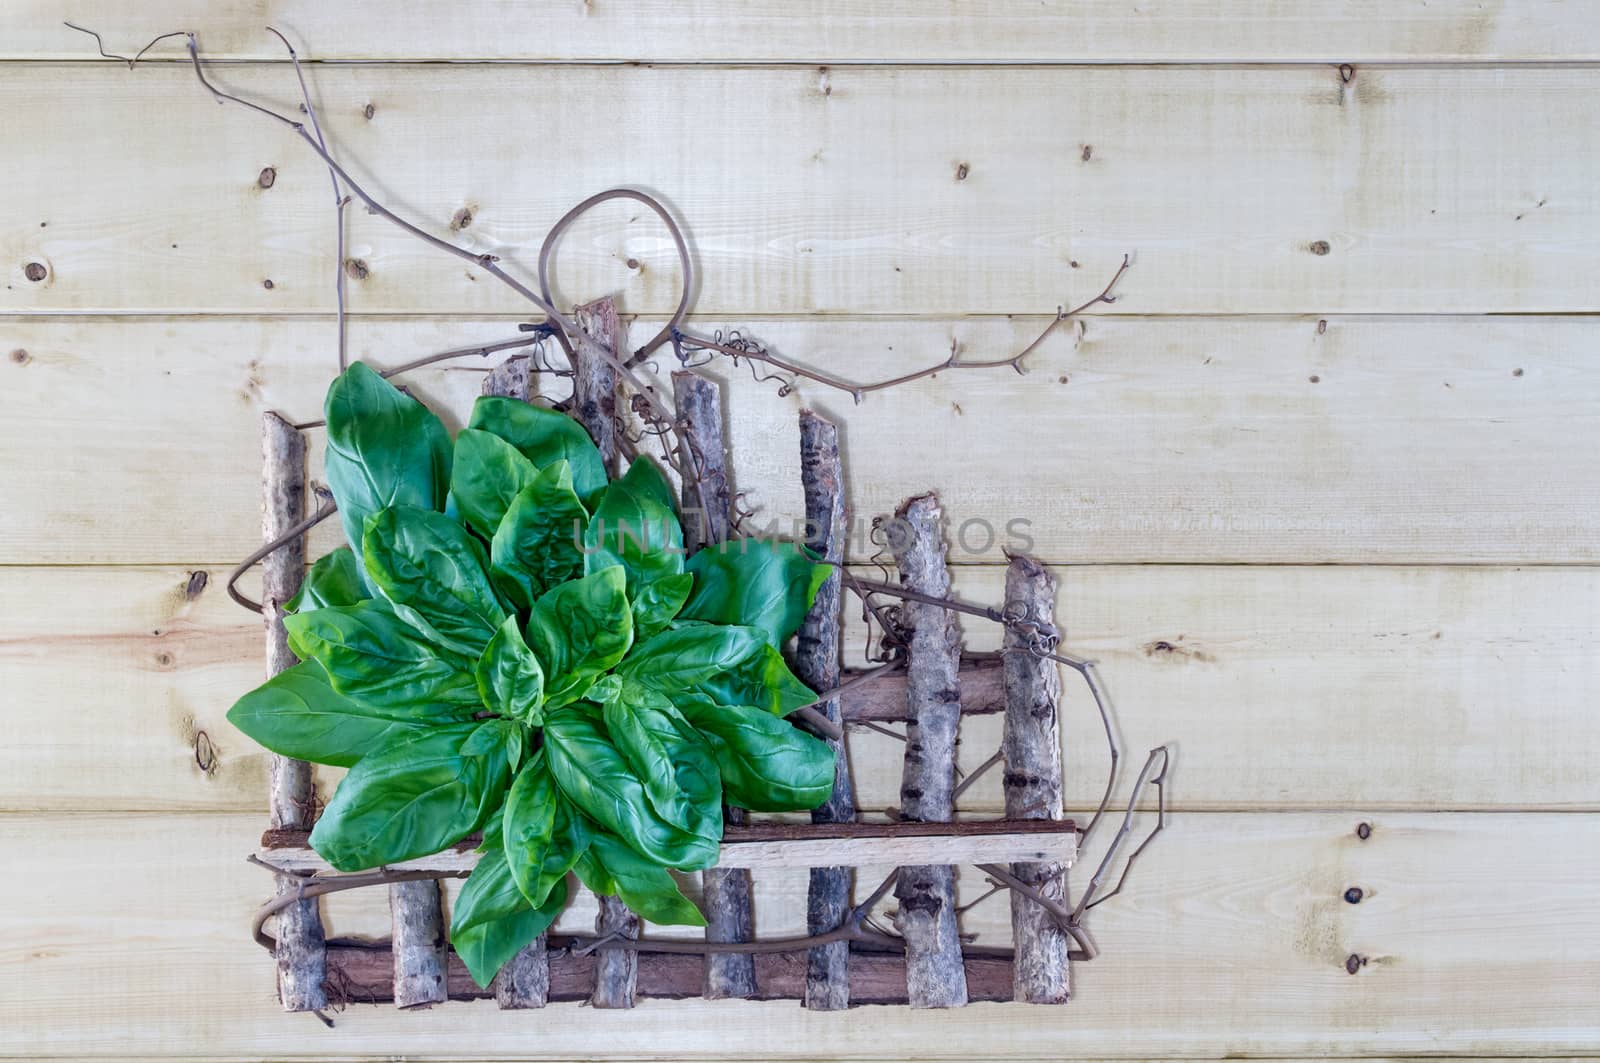 Fresh Basil Bouquet on Rustic Background by krisblackphotography